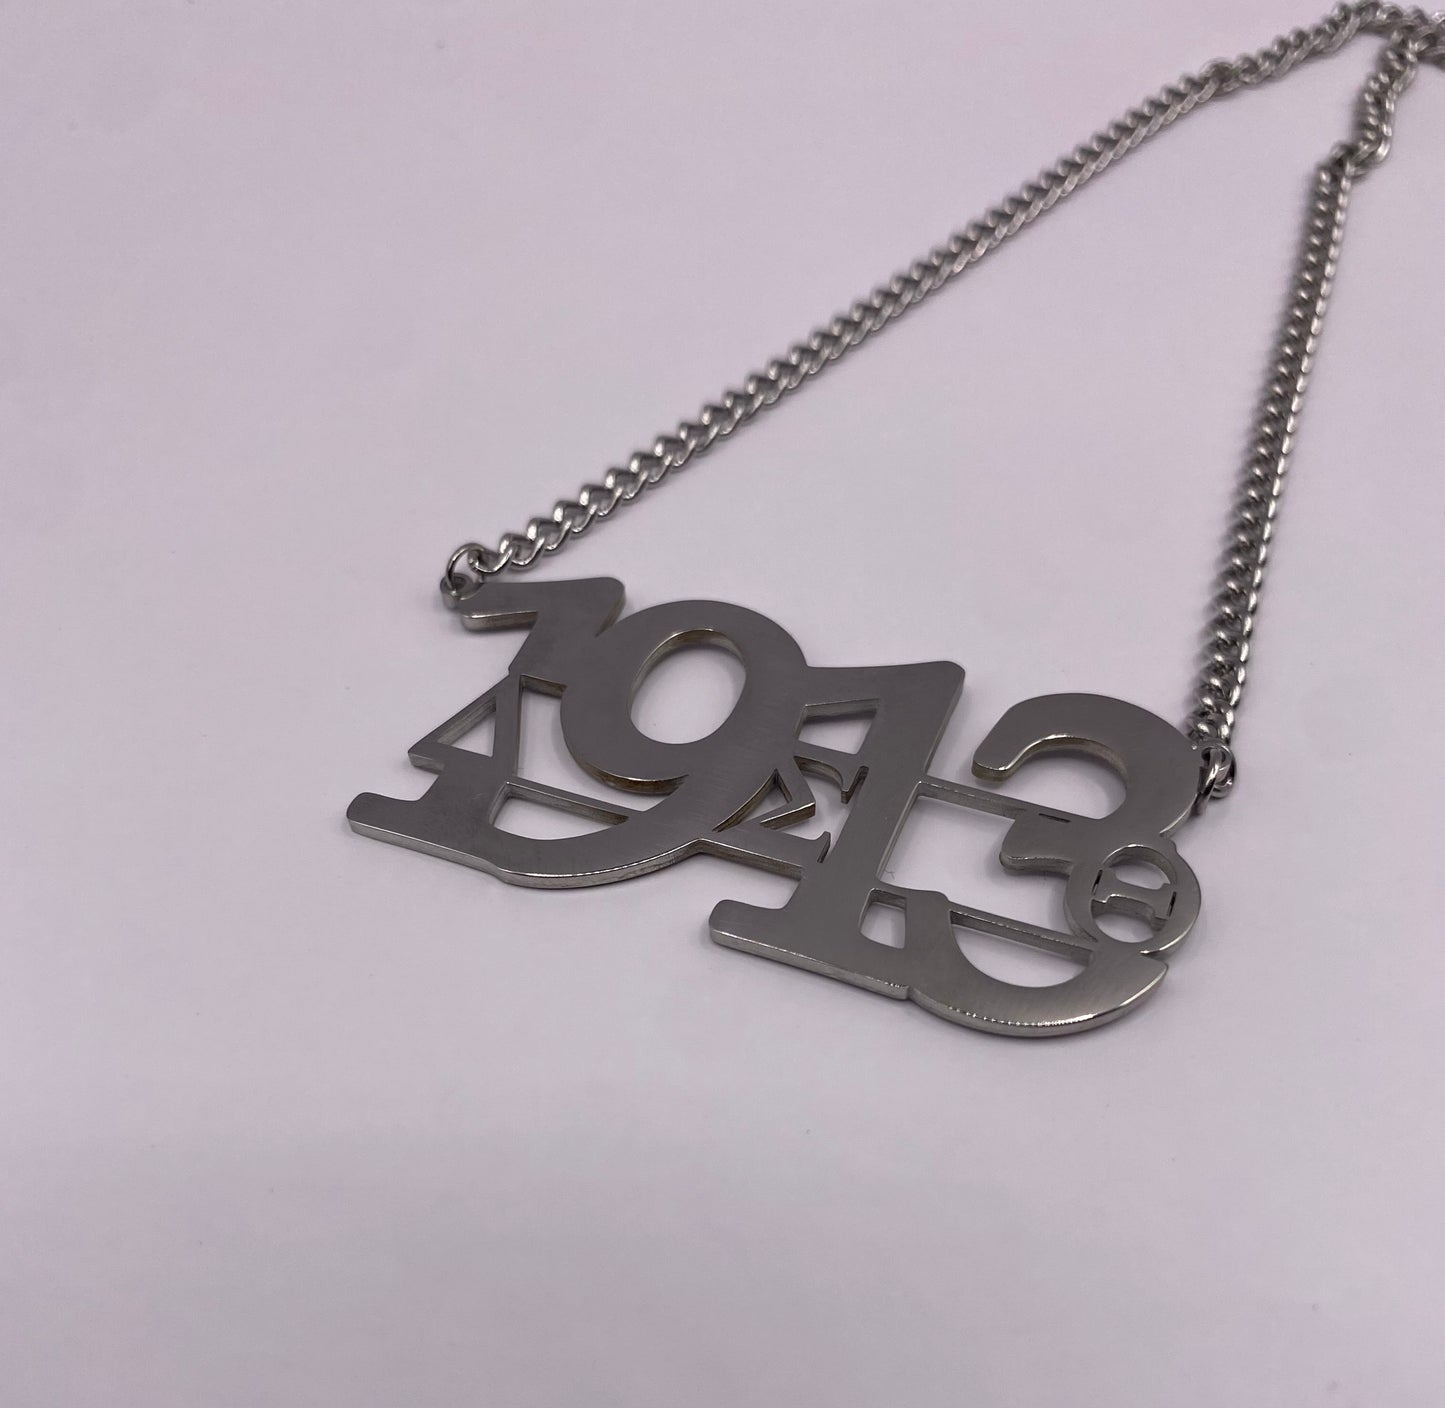 Delta Sigma Theta- “All of my love” Necklace